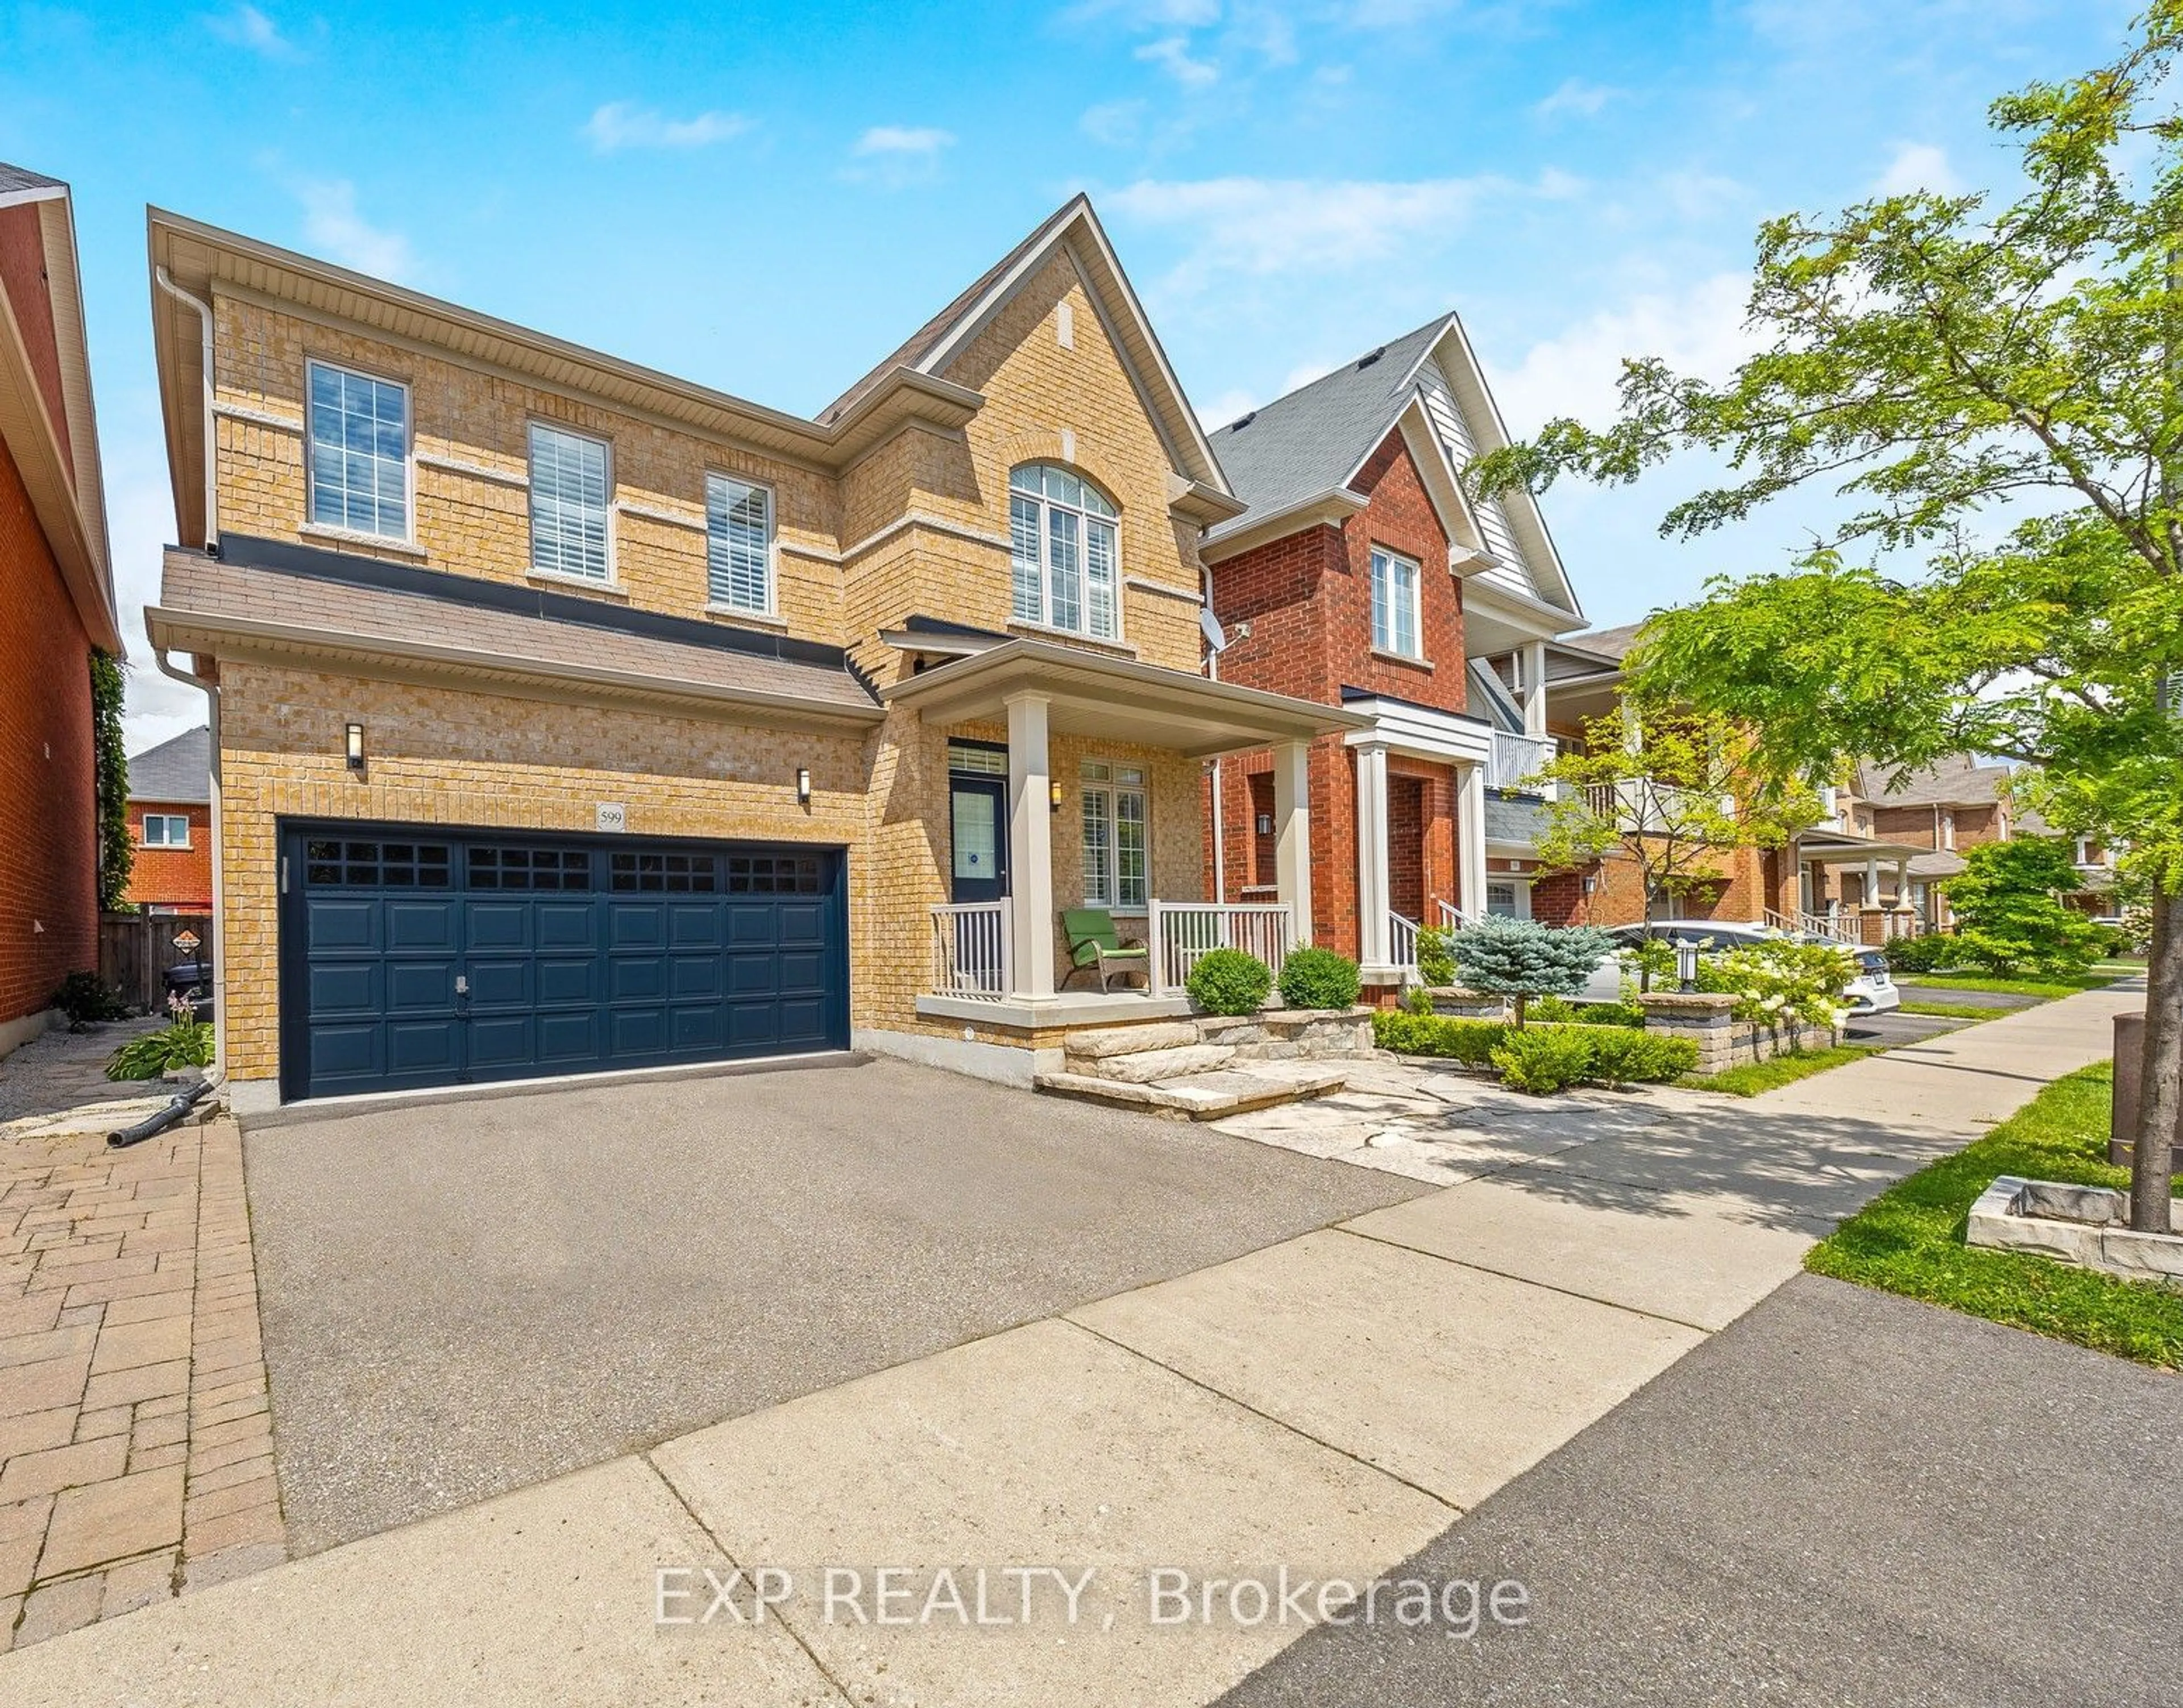 Home with brick exterior material for 599 Nairn Circ, Milton Ontario L9T 7X6